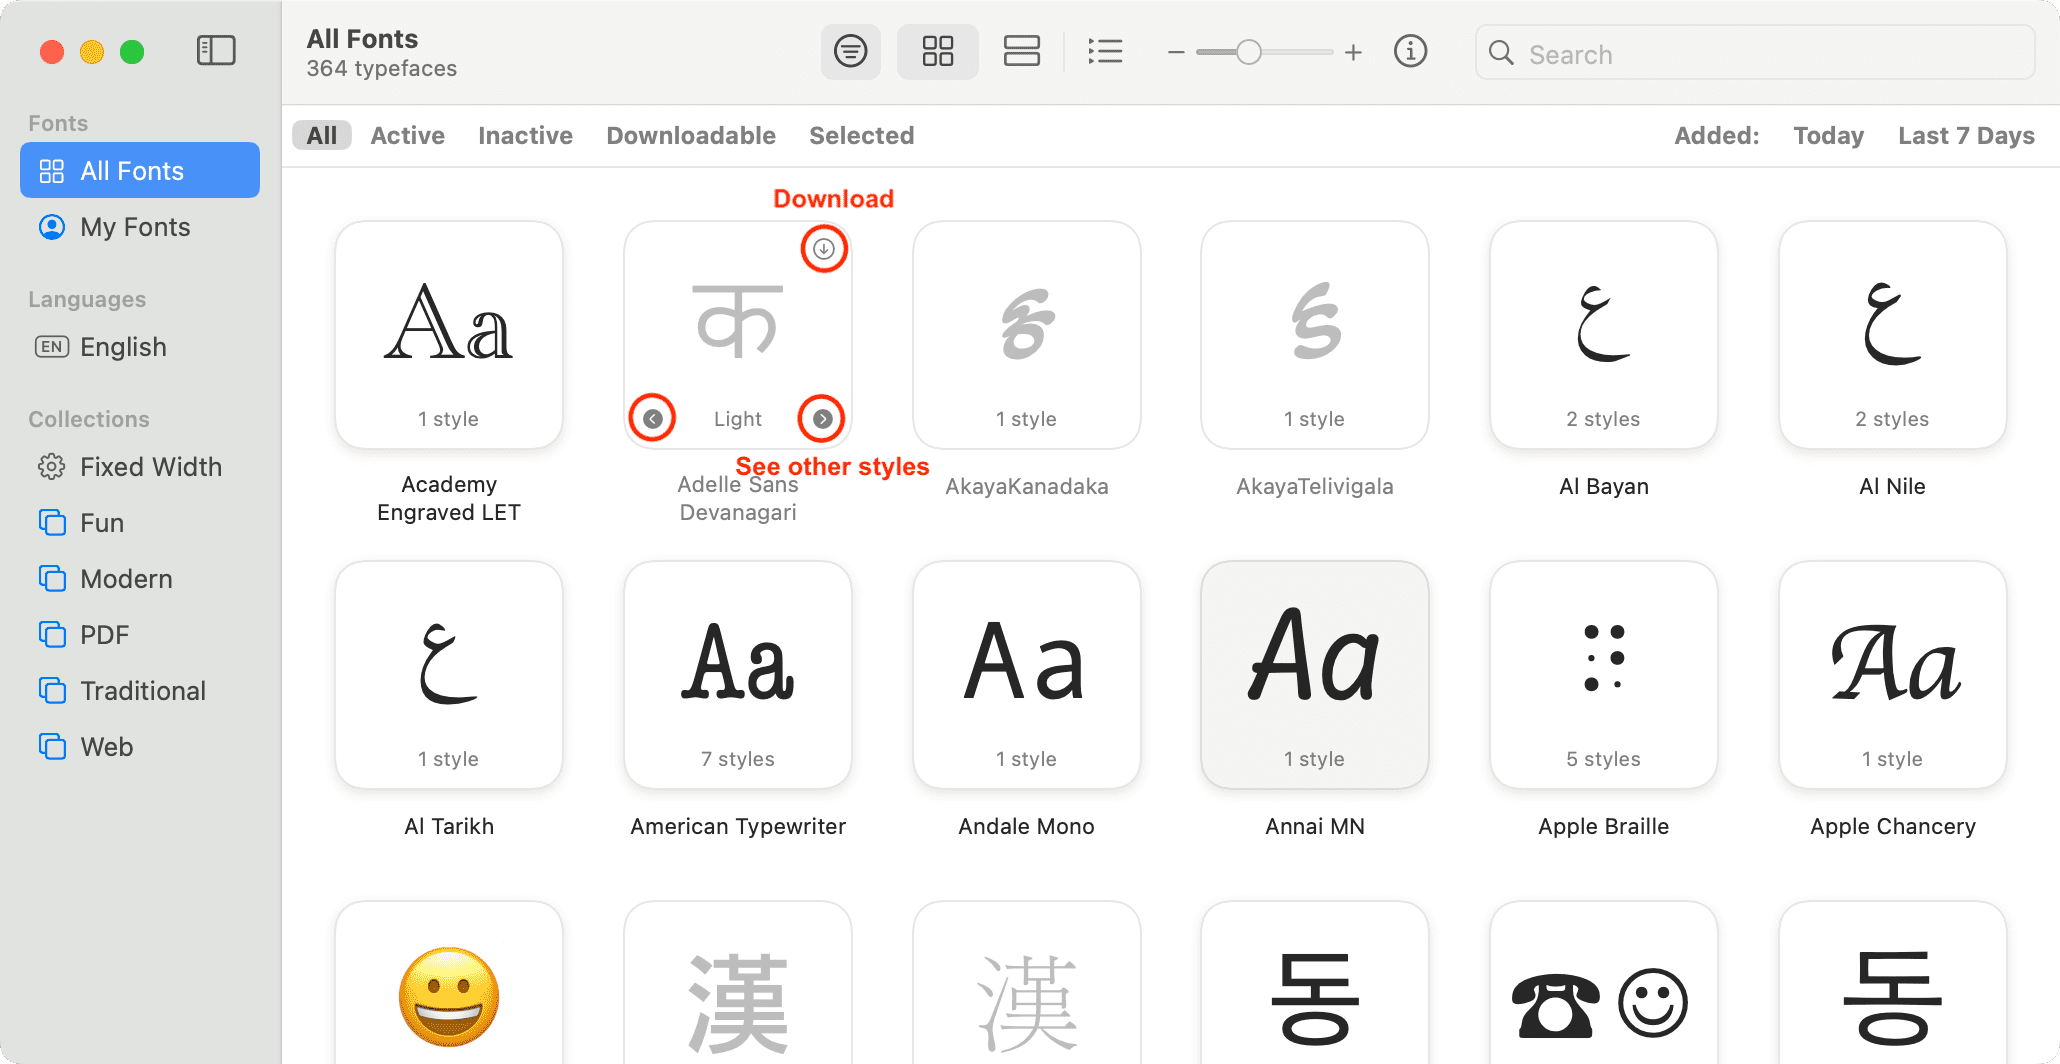 Preview and download fonts in Font Book app on Mac